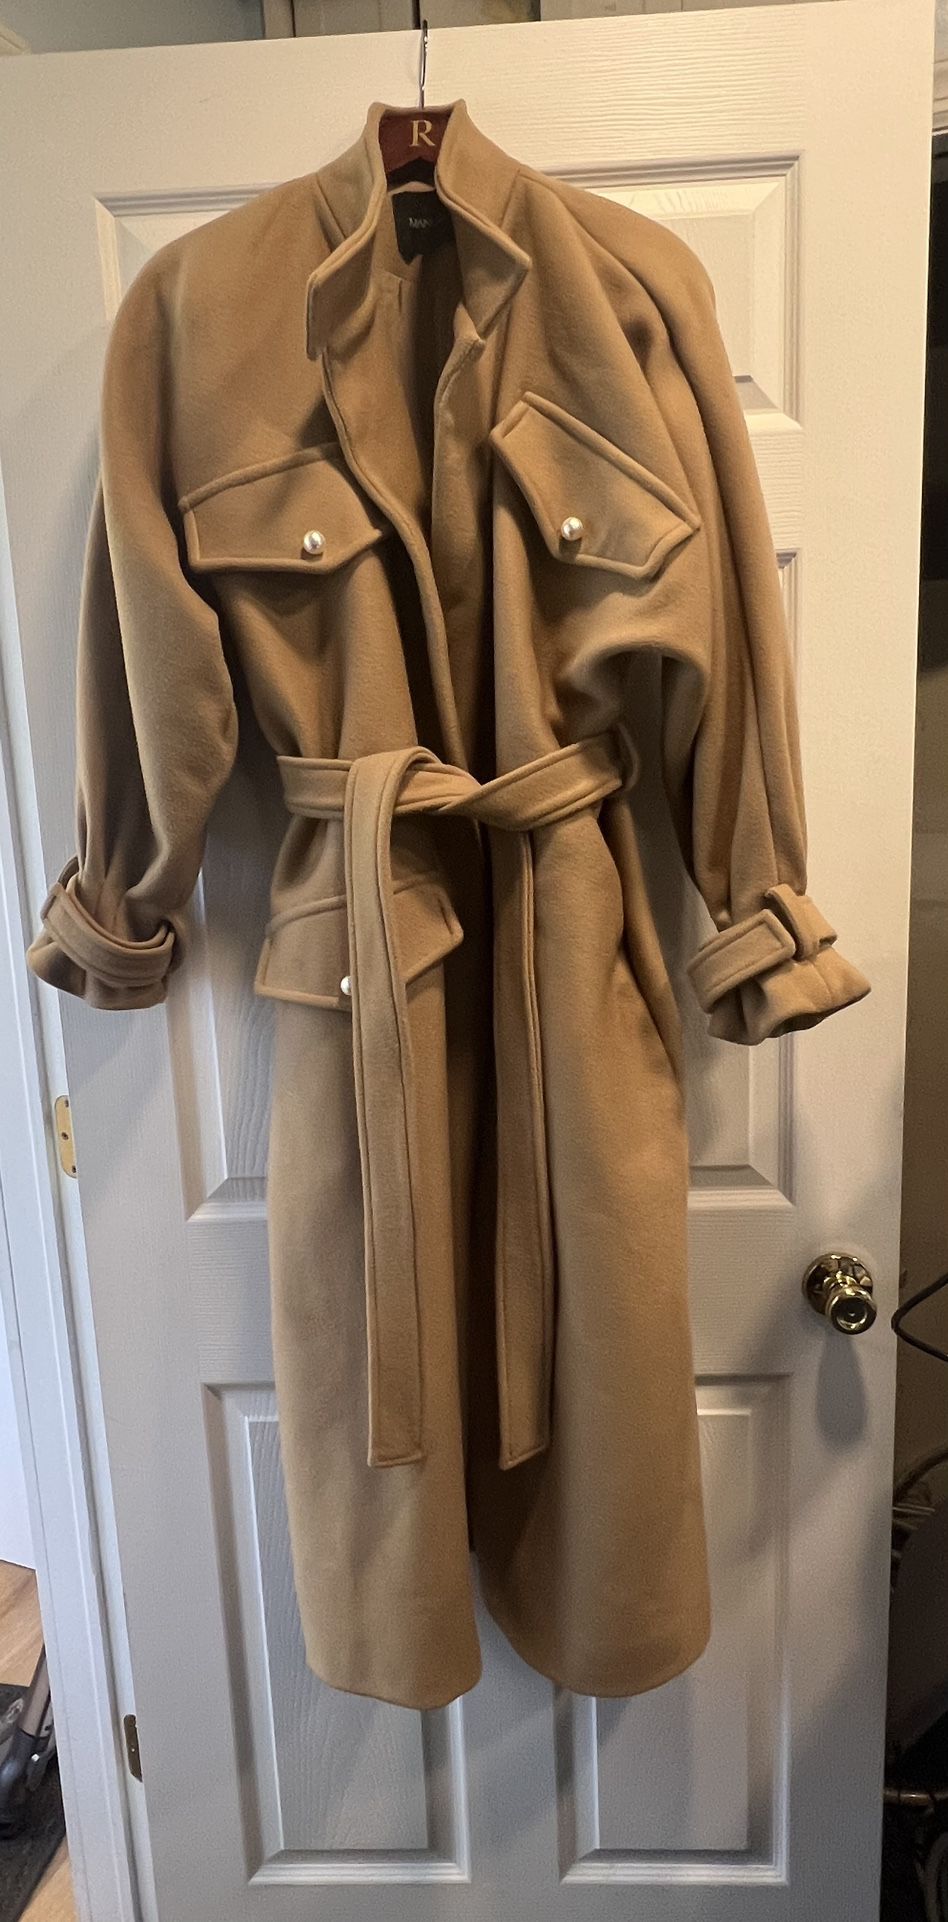 Manuri 100% Cashmere and Silk Lining Camel Color Coat, Size M